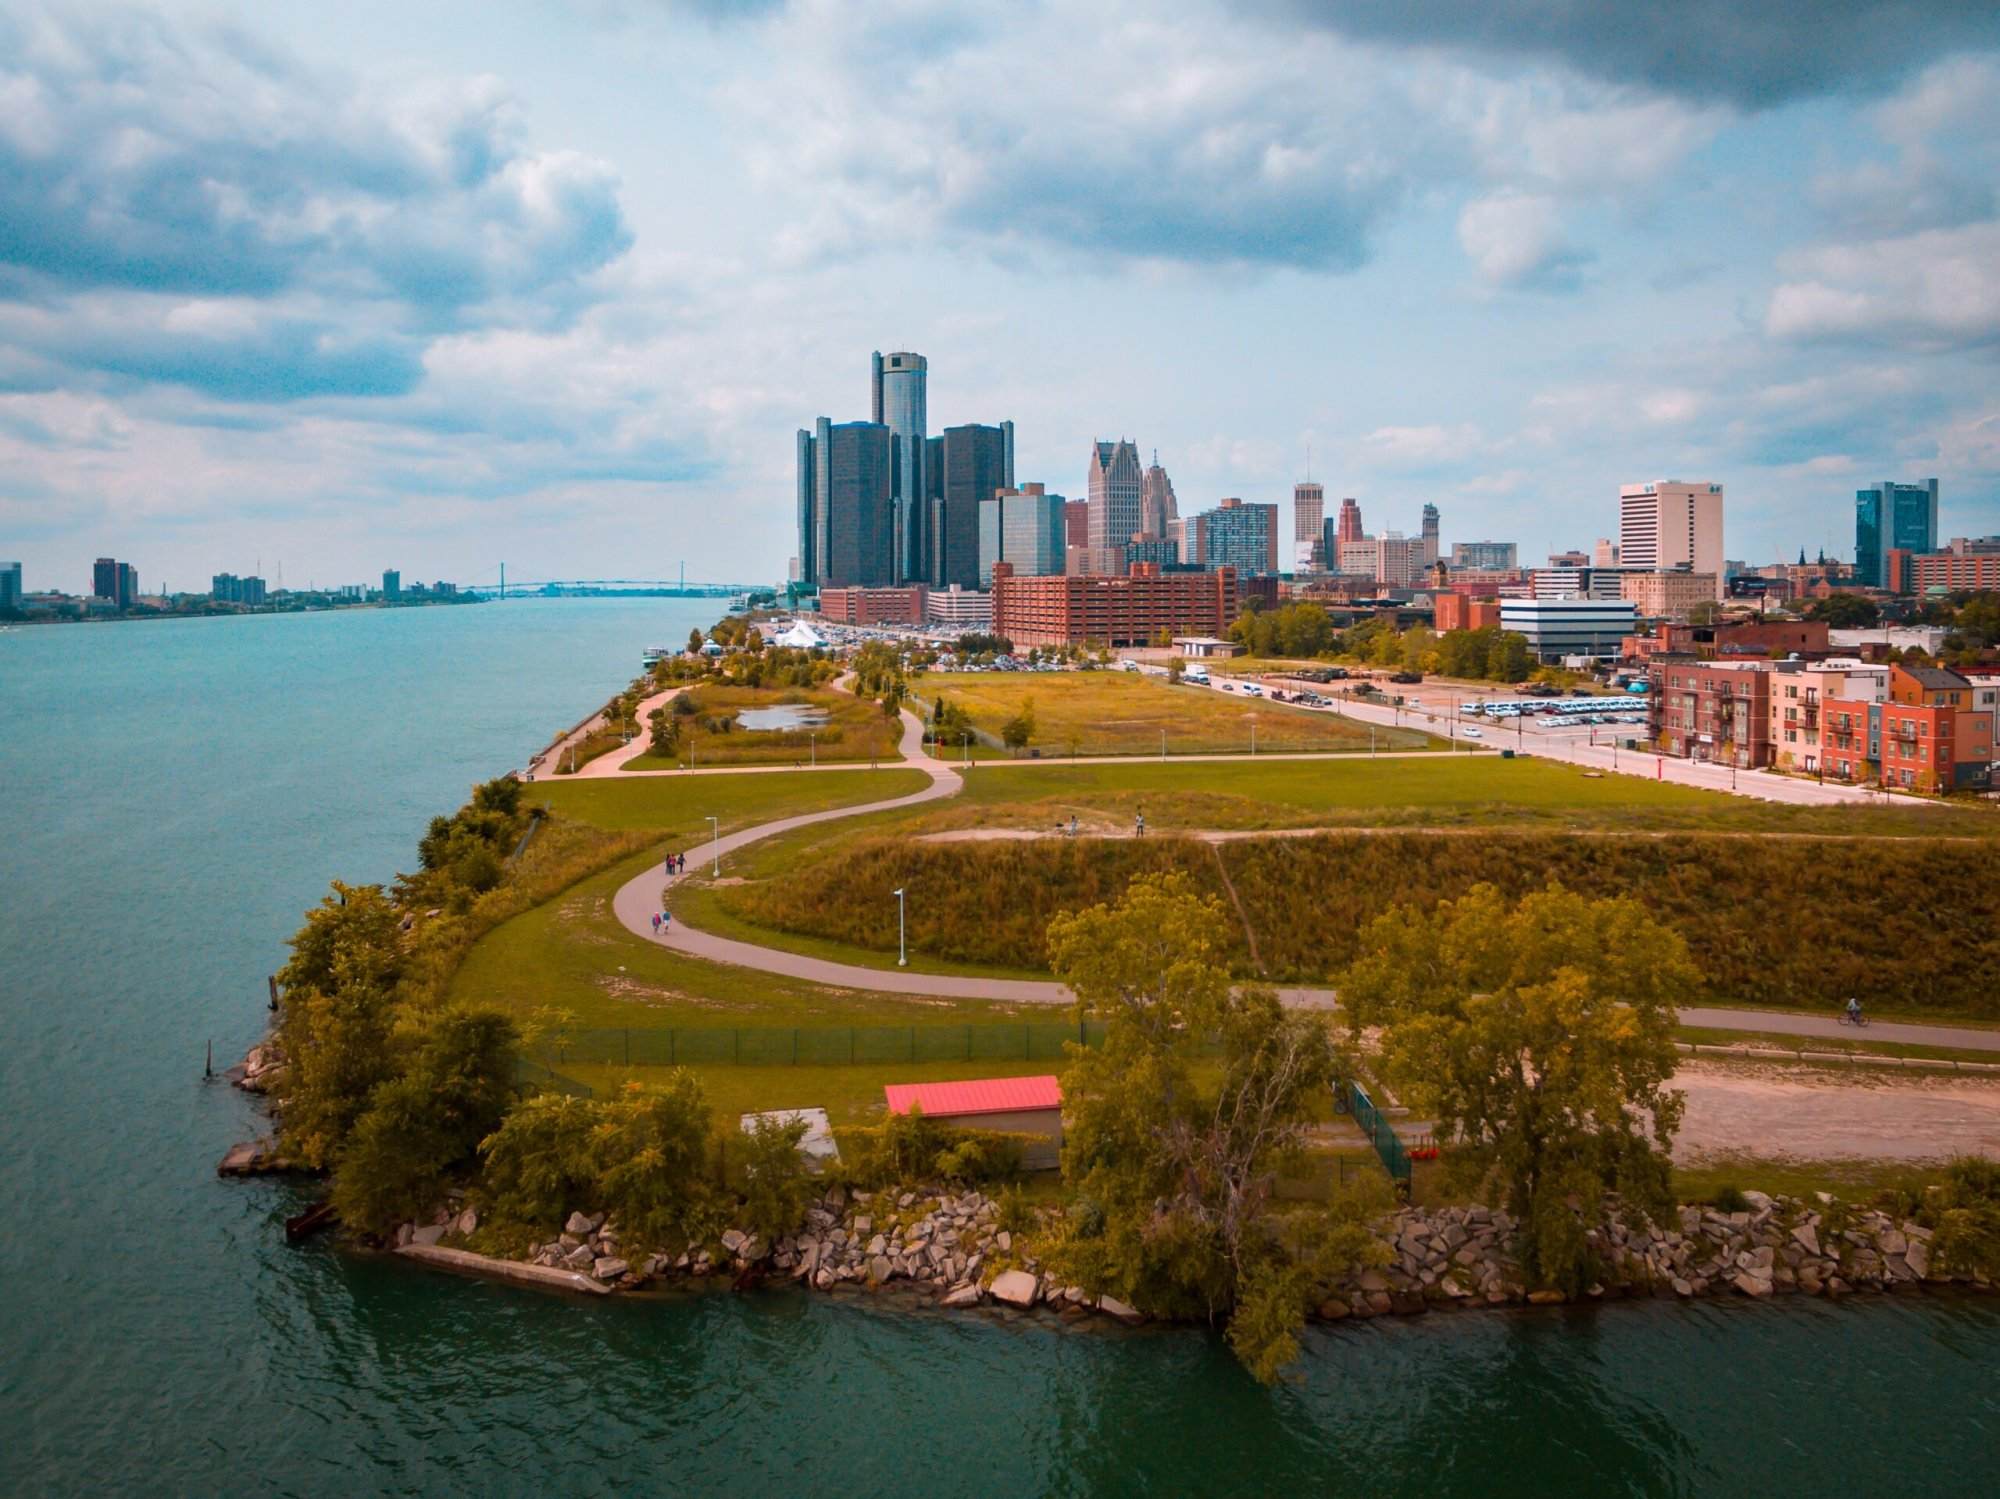 An aerial view of the detroit skyline on a cloudy day.